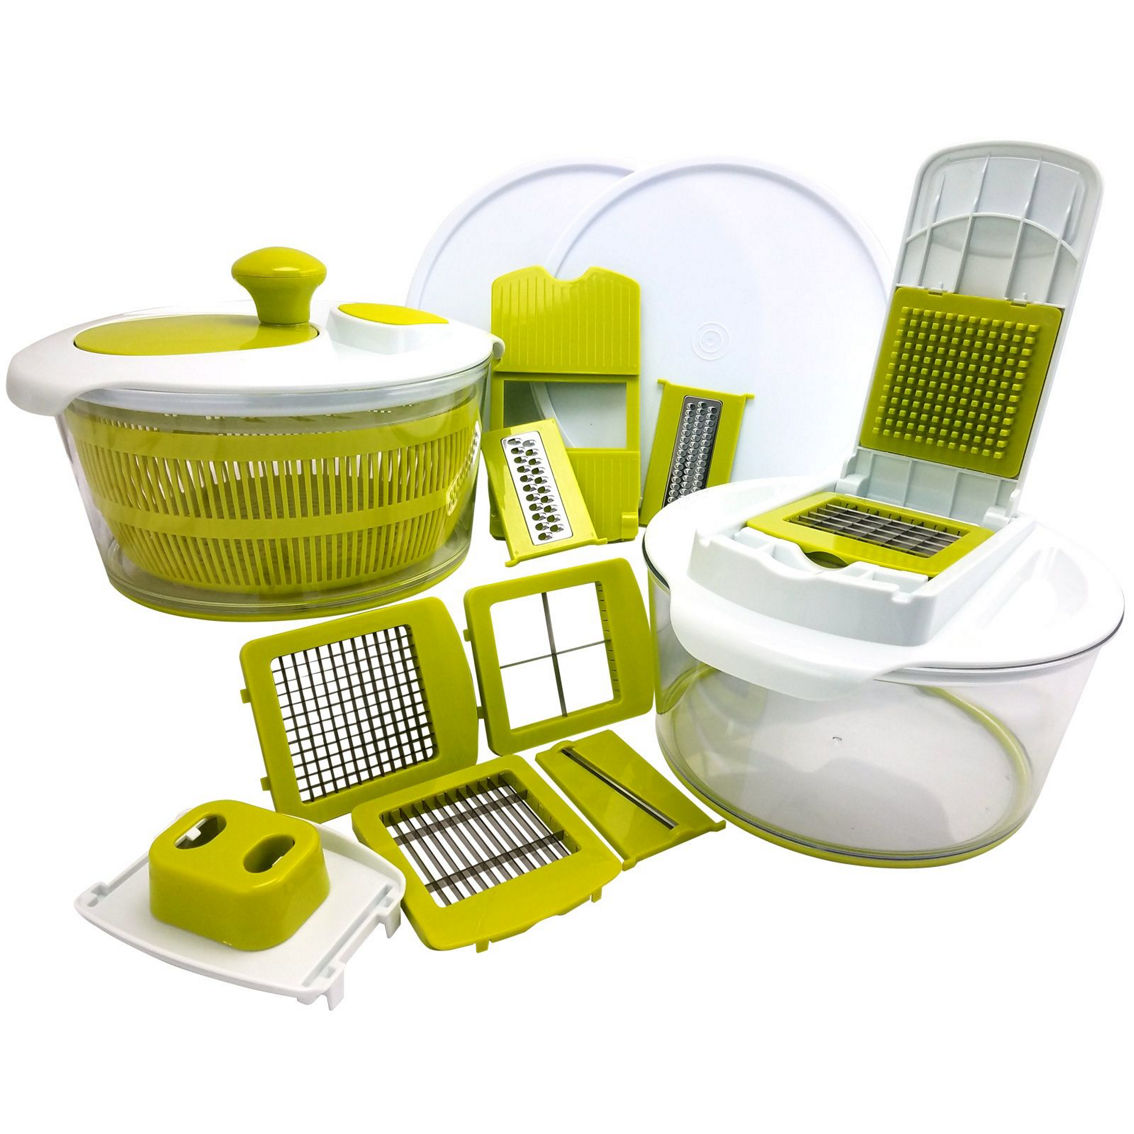 MegaChef 10-in-1 Multi-Use Salad Spinning Slicer, Dicer and Chopper with Interch - Image 3 of 5